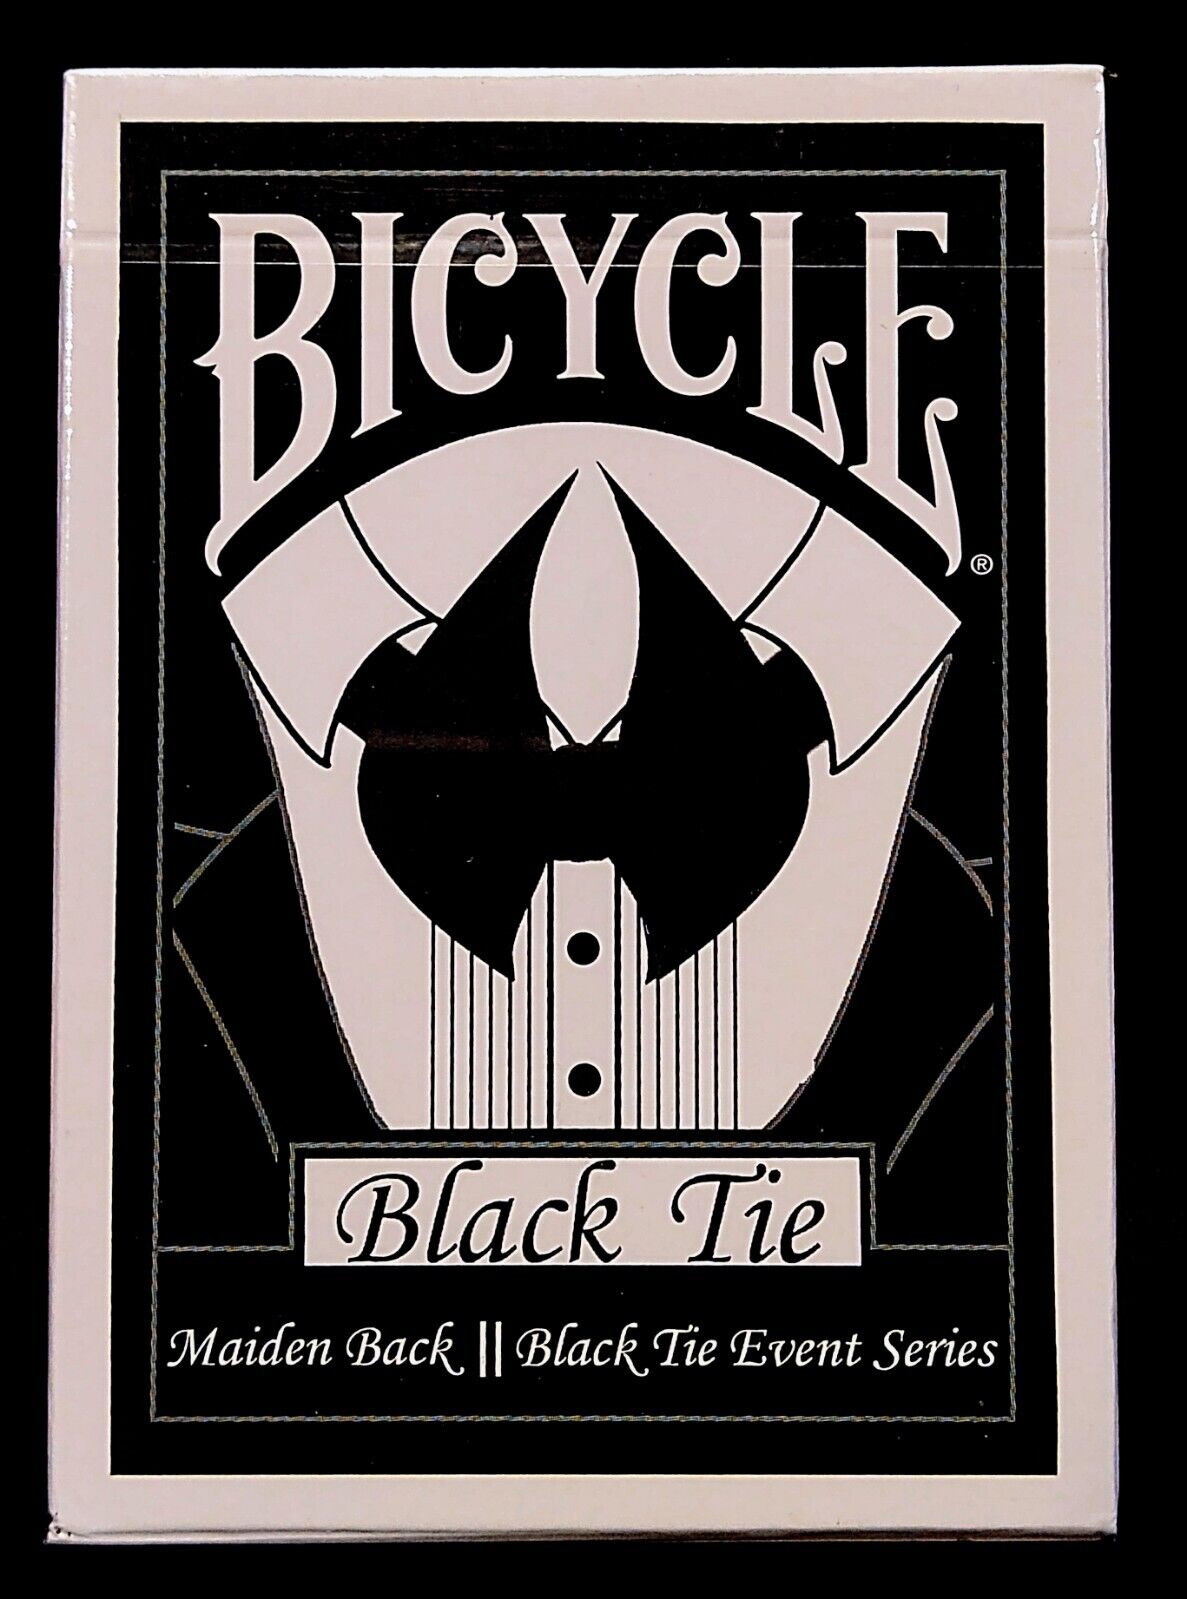 Bicycle Black Tie Maiden Back Playing Card Deck New Sealed Rare 